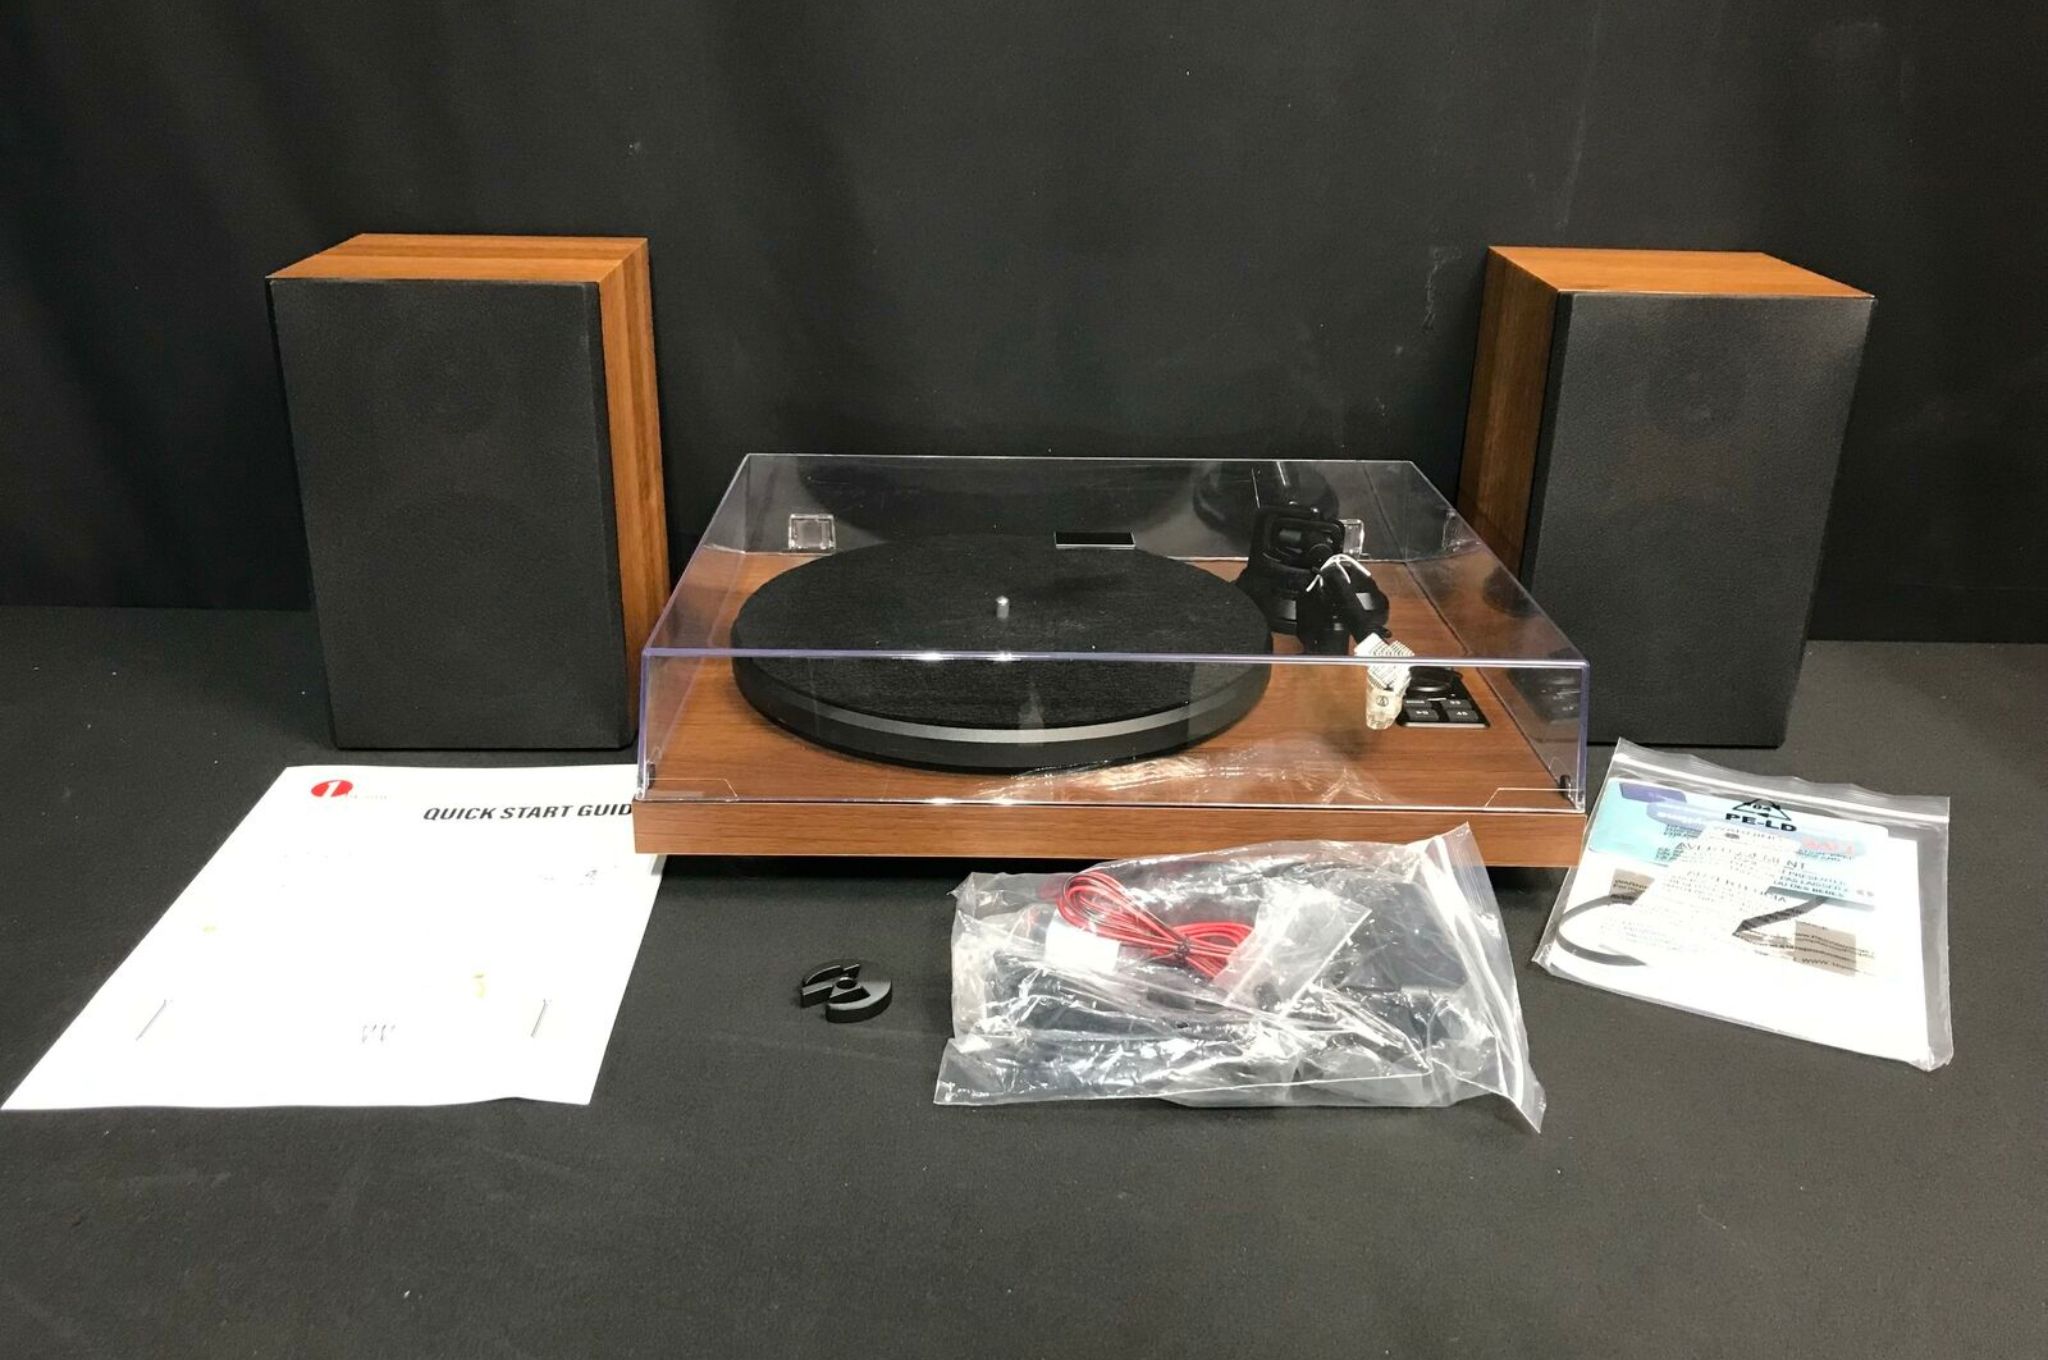 1 BY ONE Turntable with external speakers